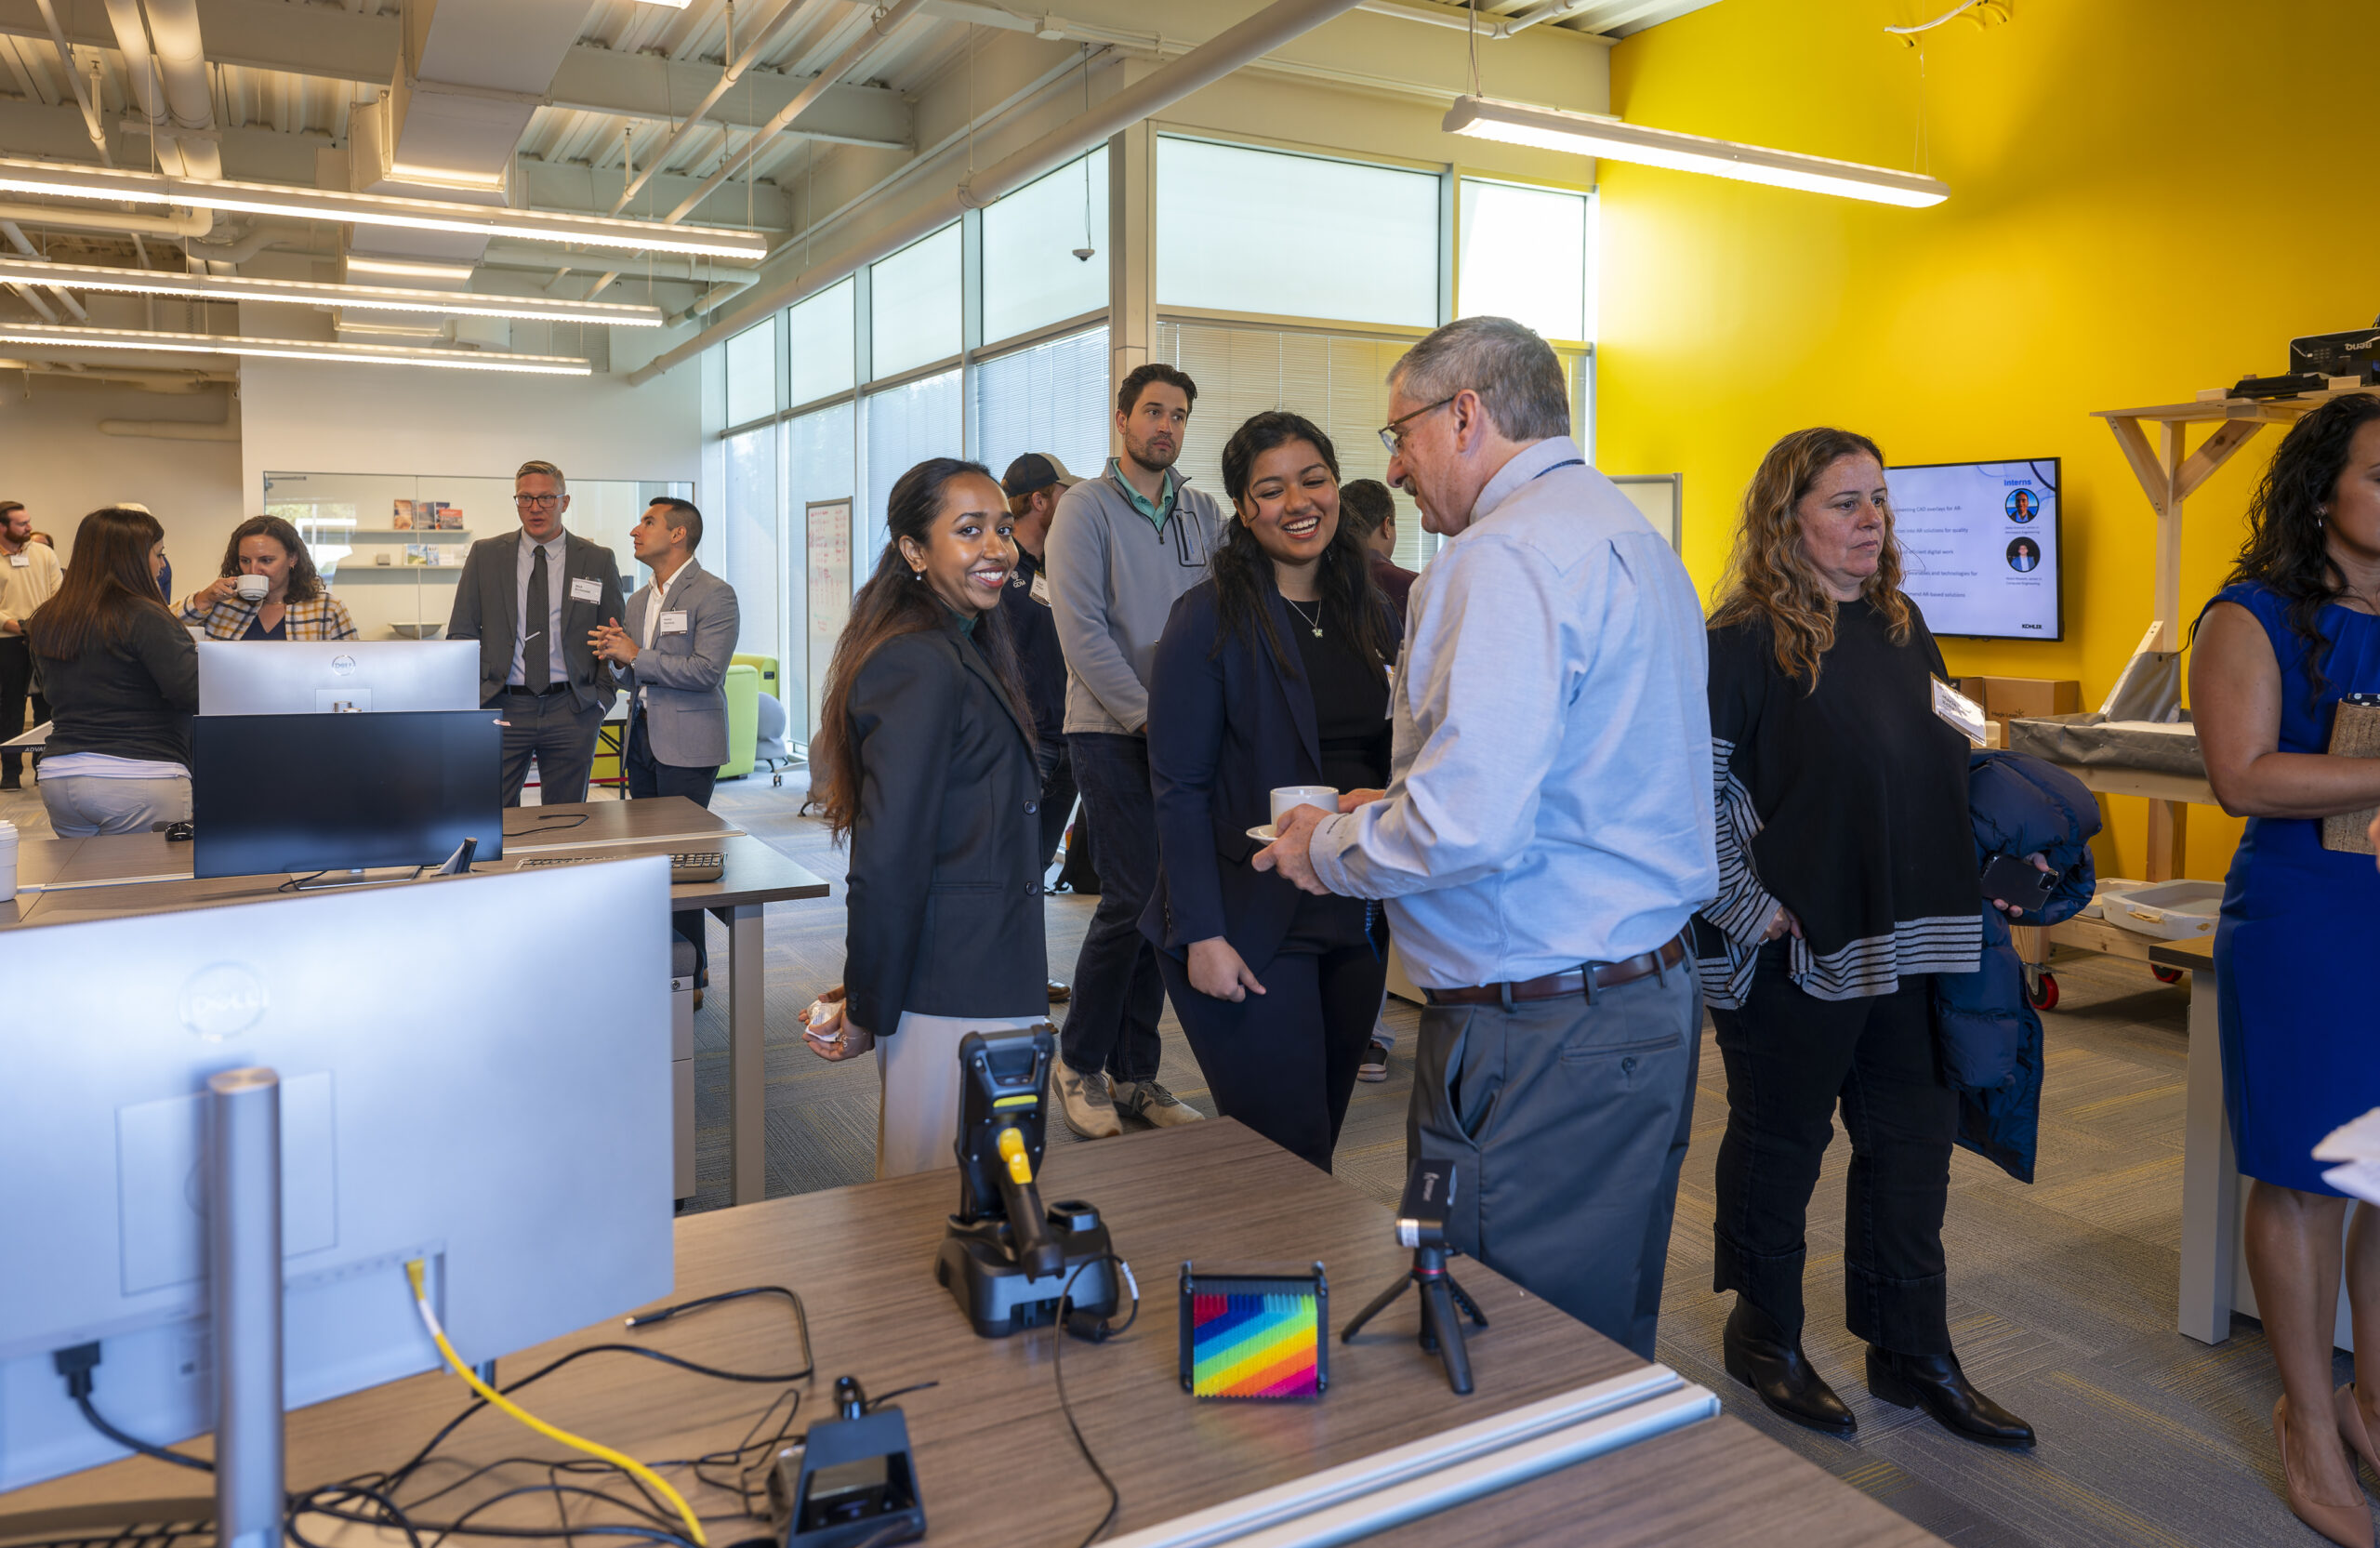 Ceremony attendees enjoy the office space at the Kohler Innovation Center.